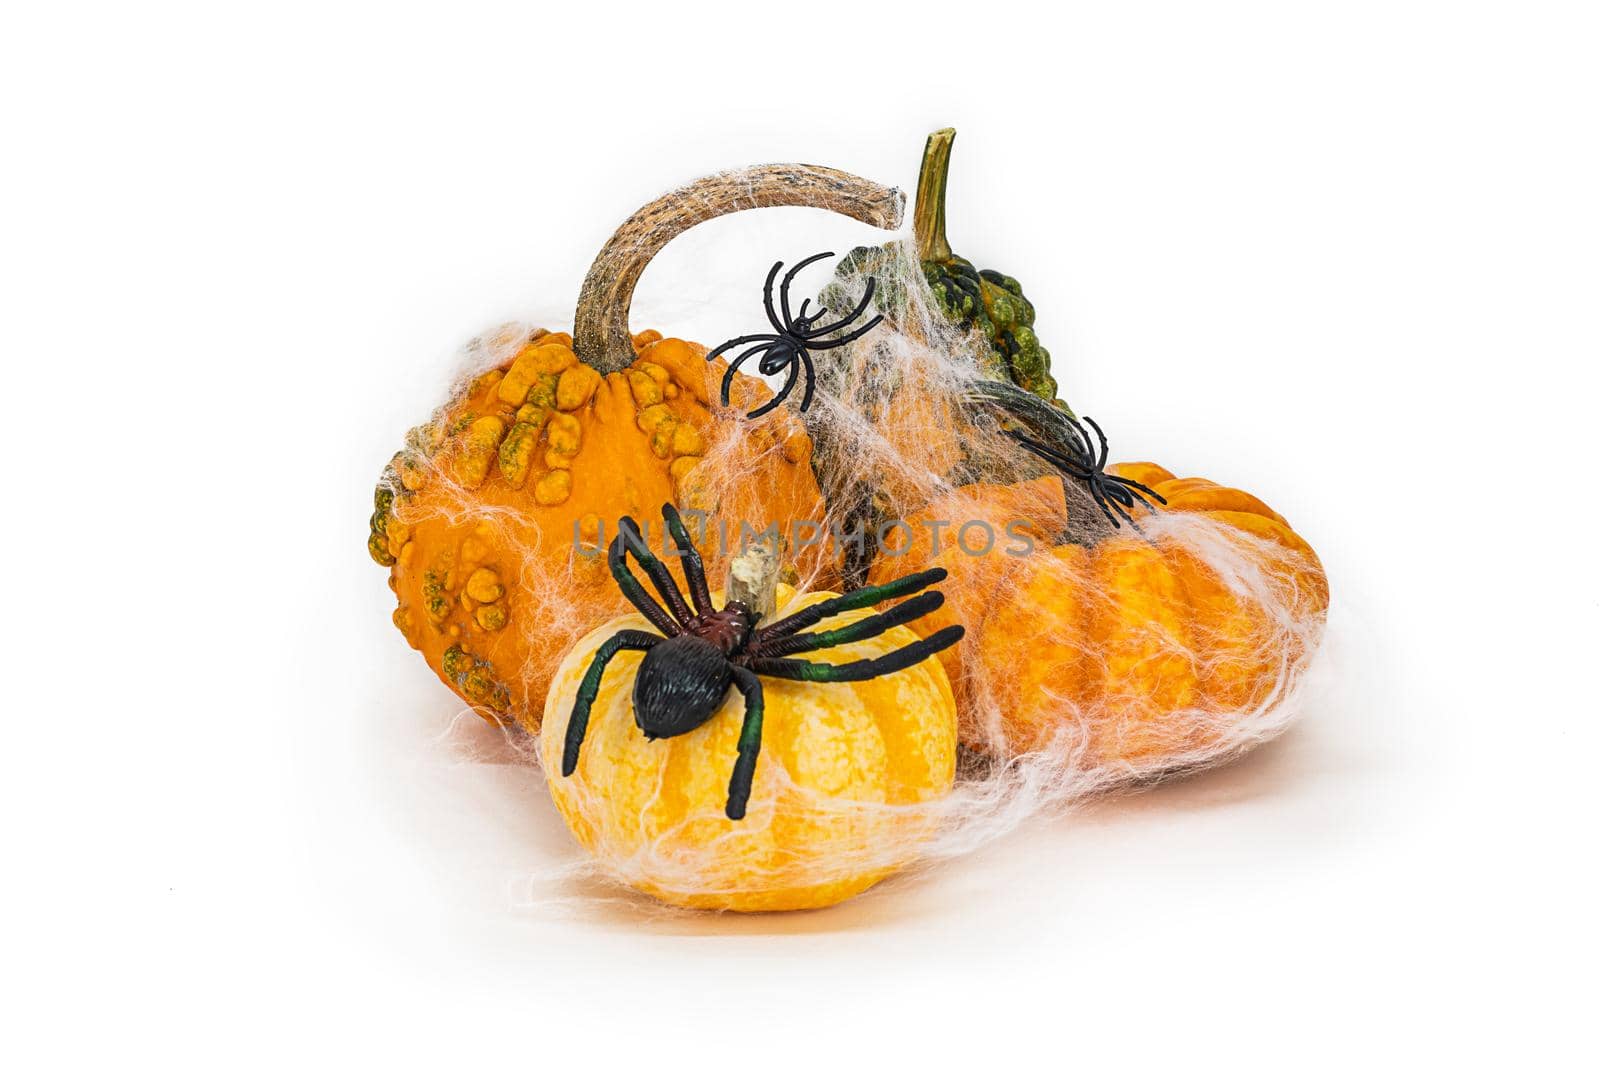 set, a bunch of small decorative pumpkins on a white background. Halloween vegetables are decorated with black spiders and cobwebs. Isolated object easy to cut out for design, poster.